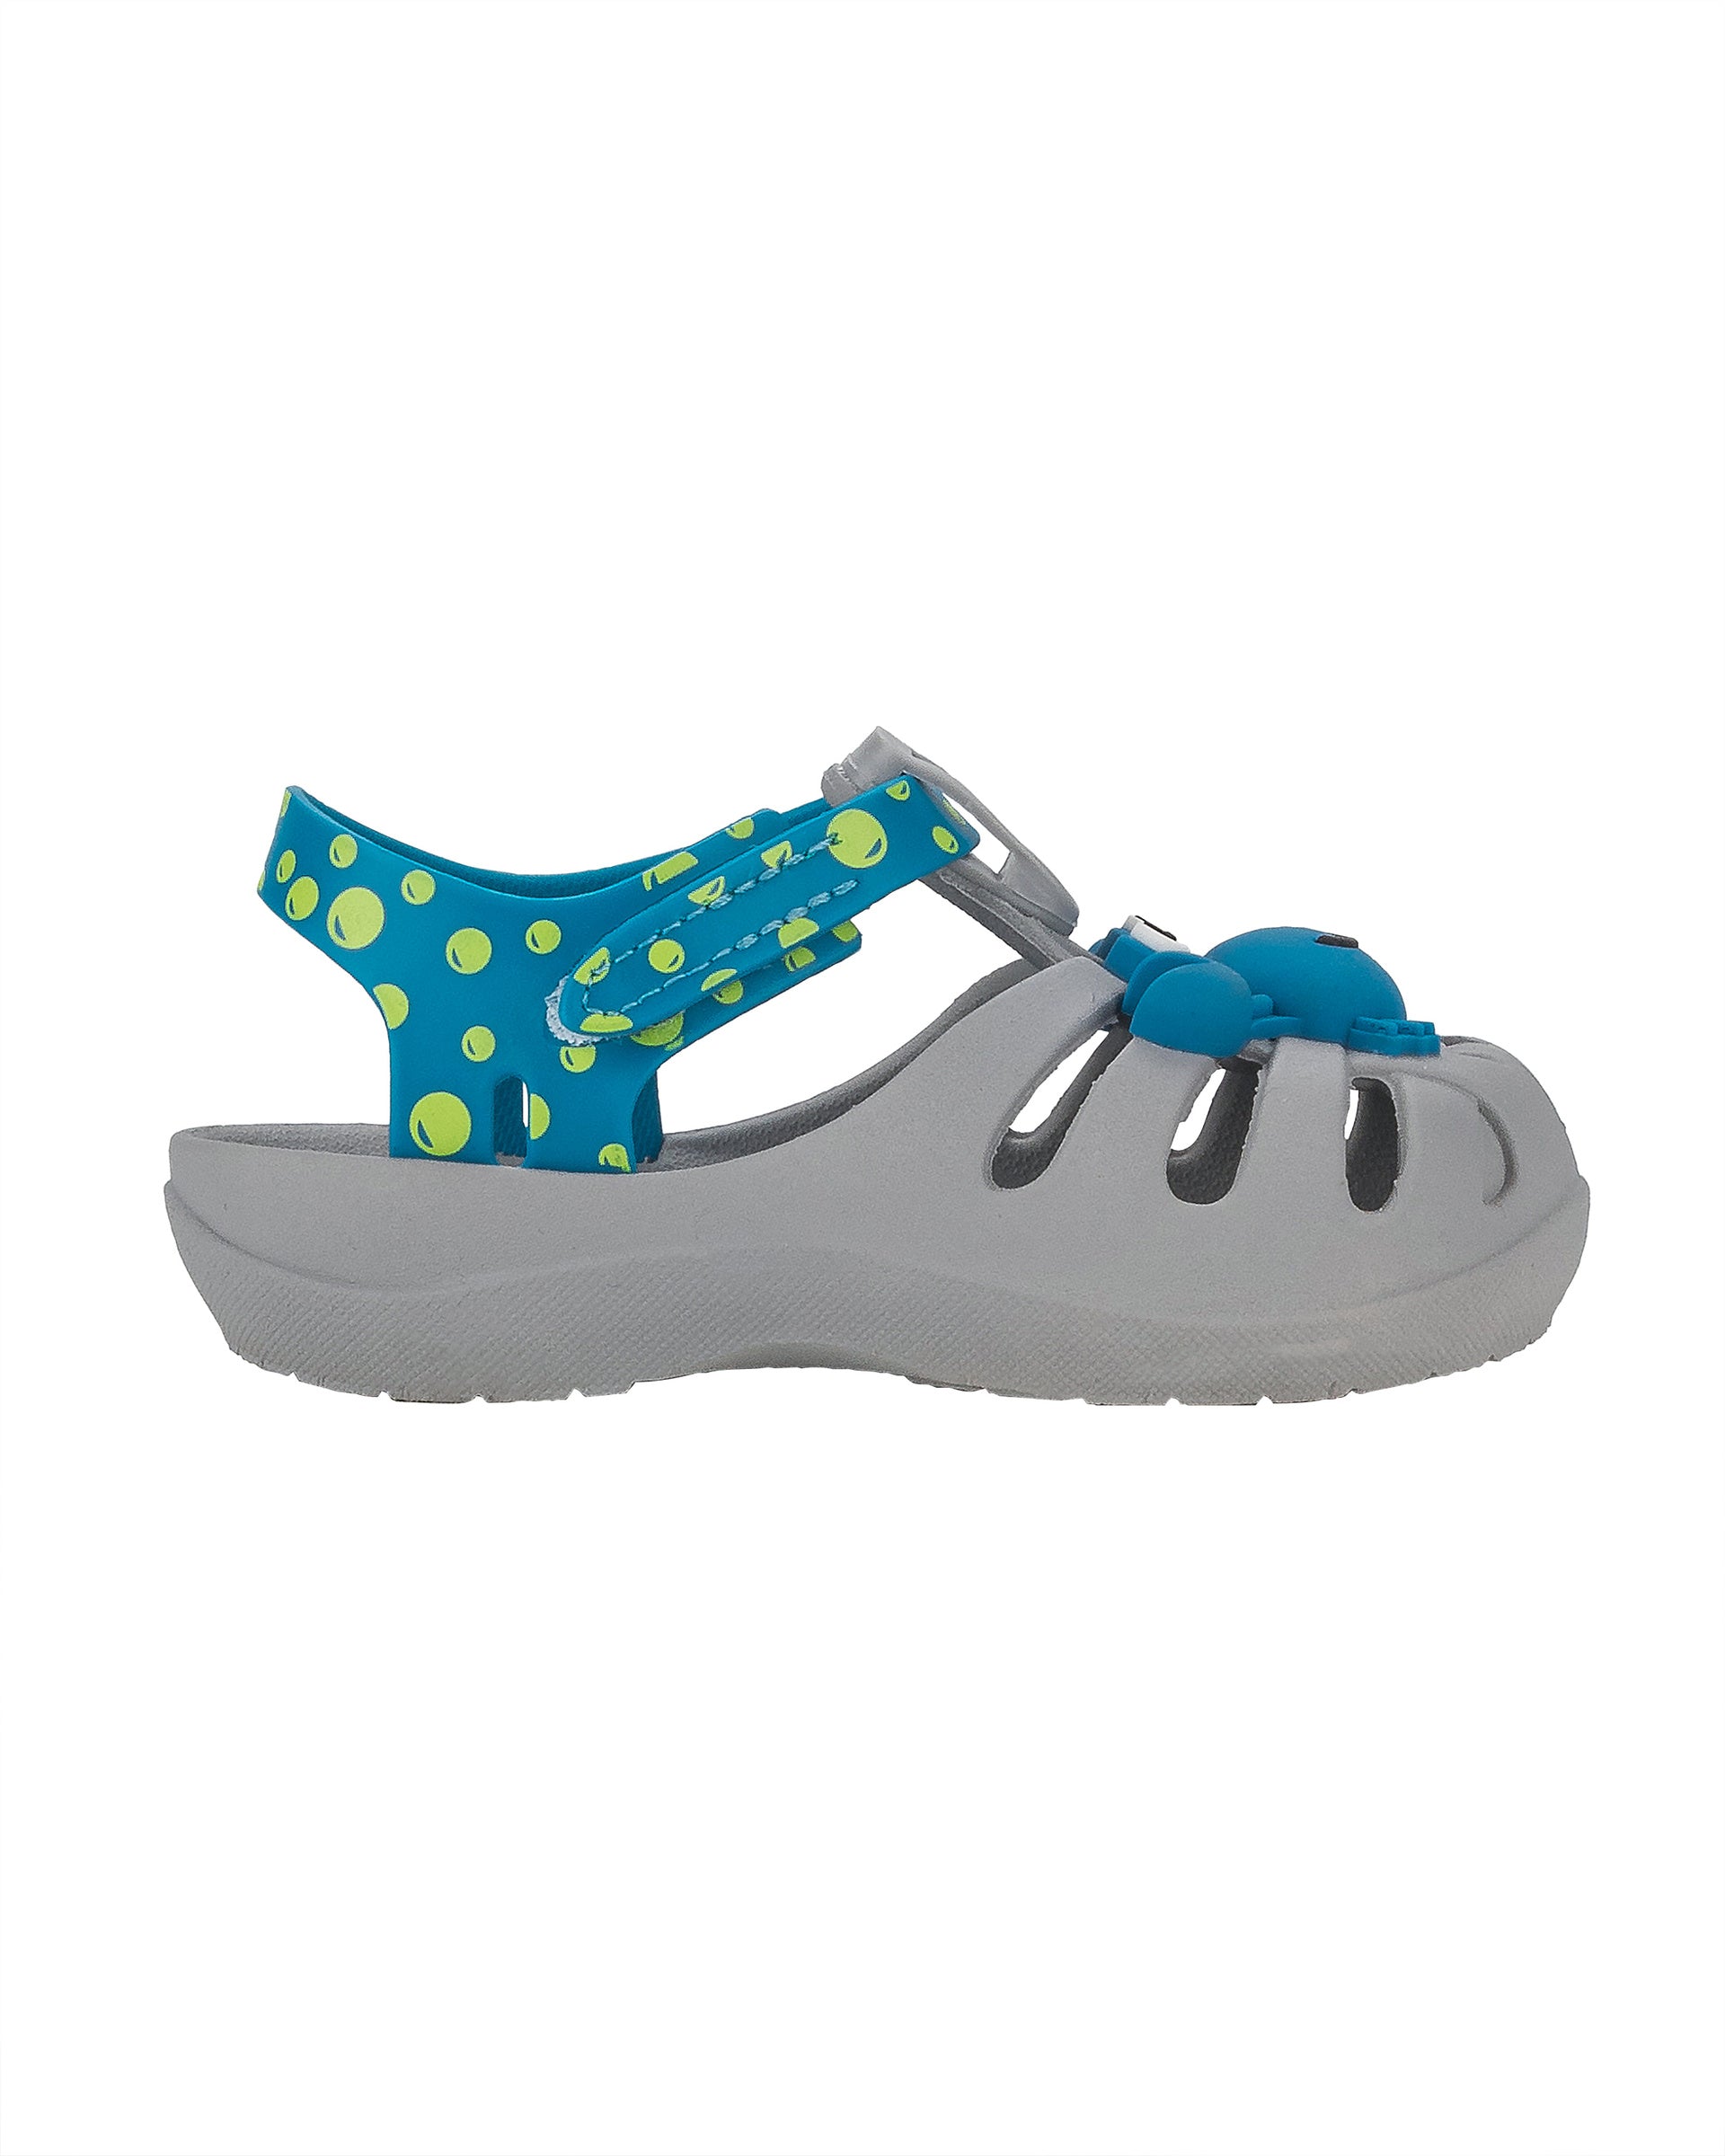 Outer side view of a grey and blue Ipanema Summer baby fisherman sandal with blue crab on upper and green bubbles on a blue strap.